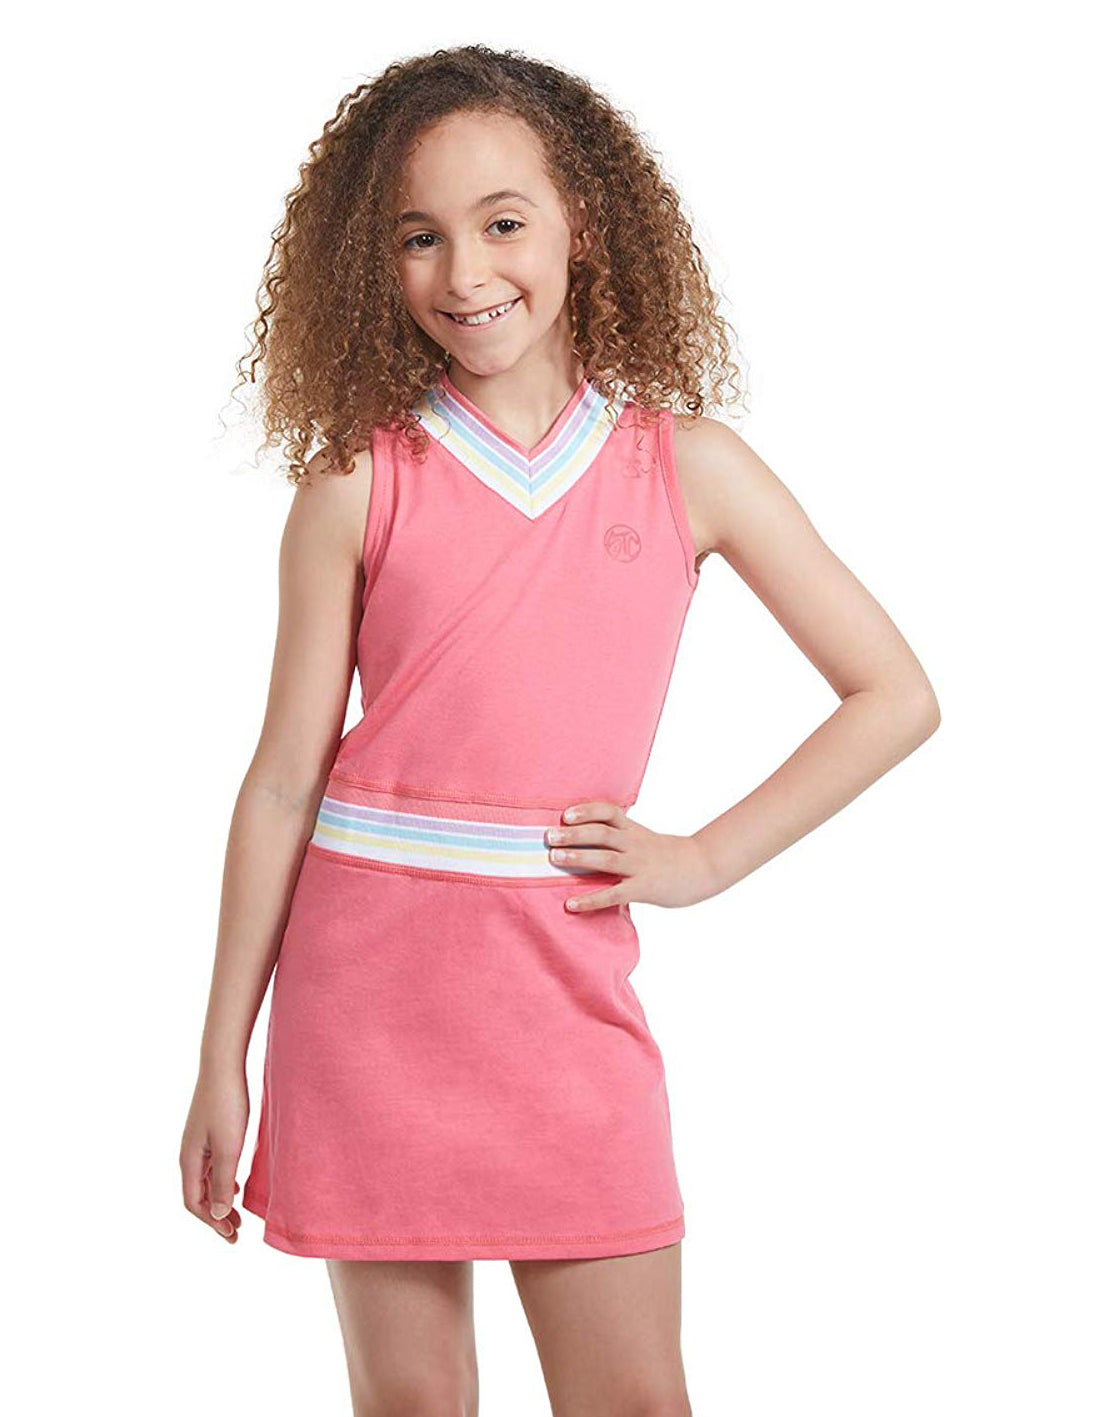 Girl's Pink Tennis And Golf Outfit – Sleeveless V Neck Tennis Dress With Shorts